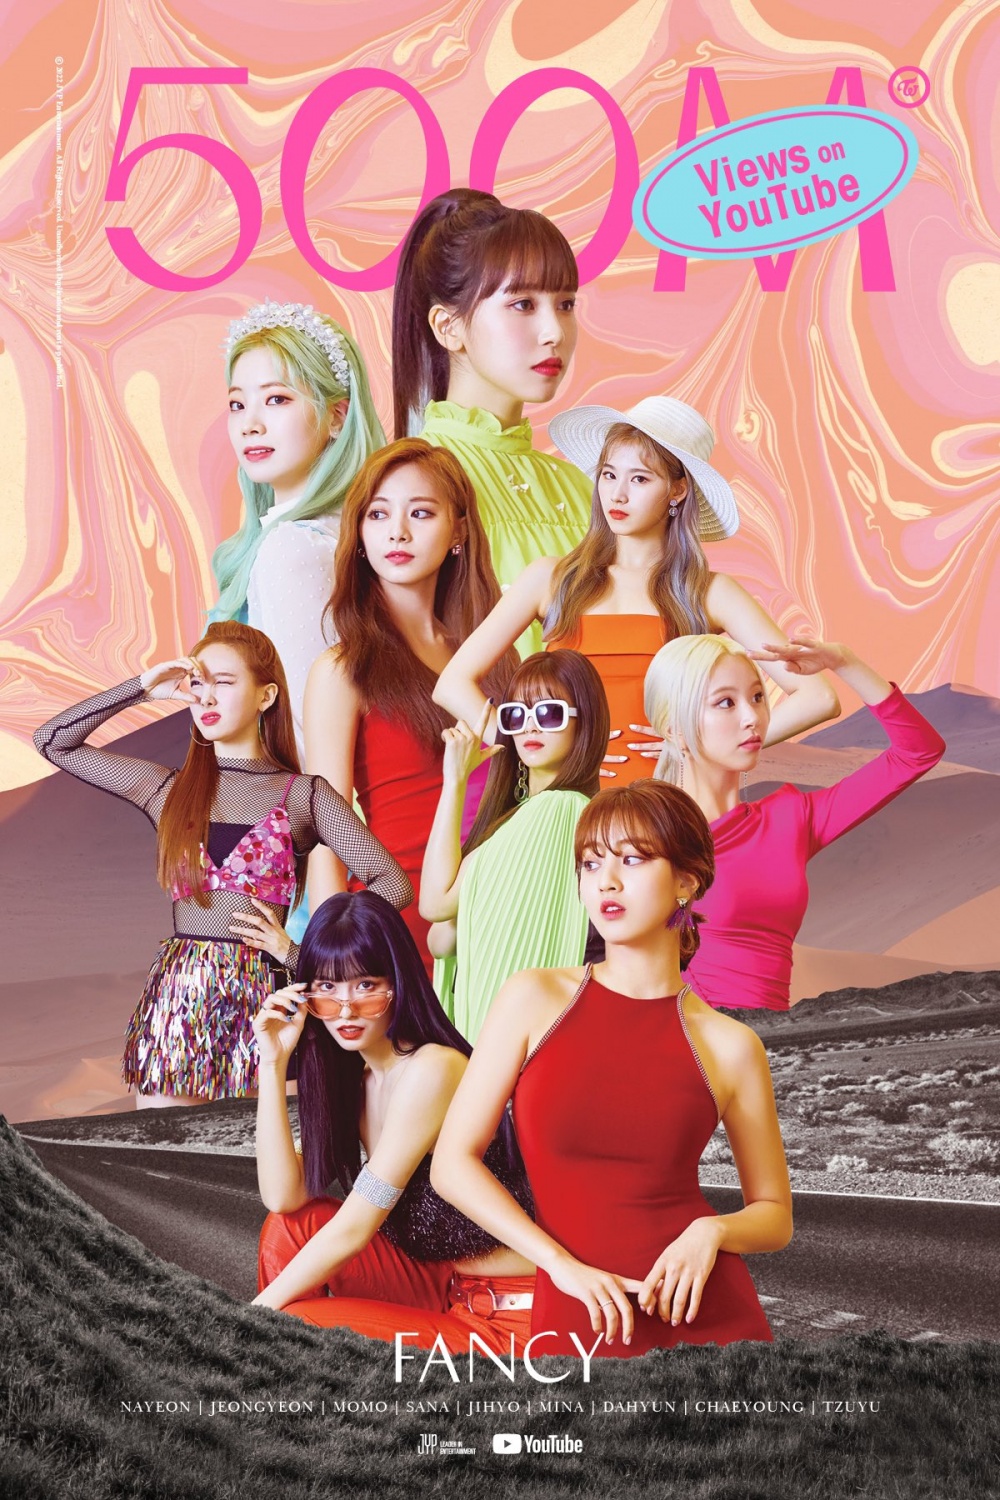 TWICE Tops the Oricon Weekly Chart in Japan-- 'Best Record for a Foreign Female Artist of All Time'